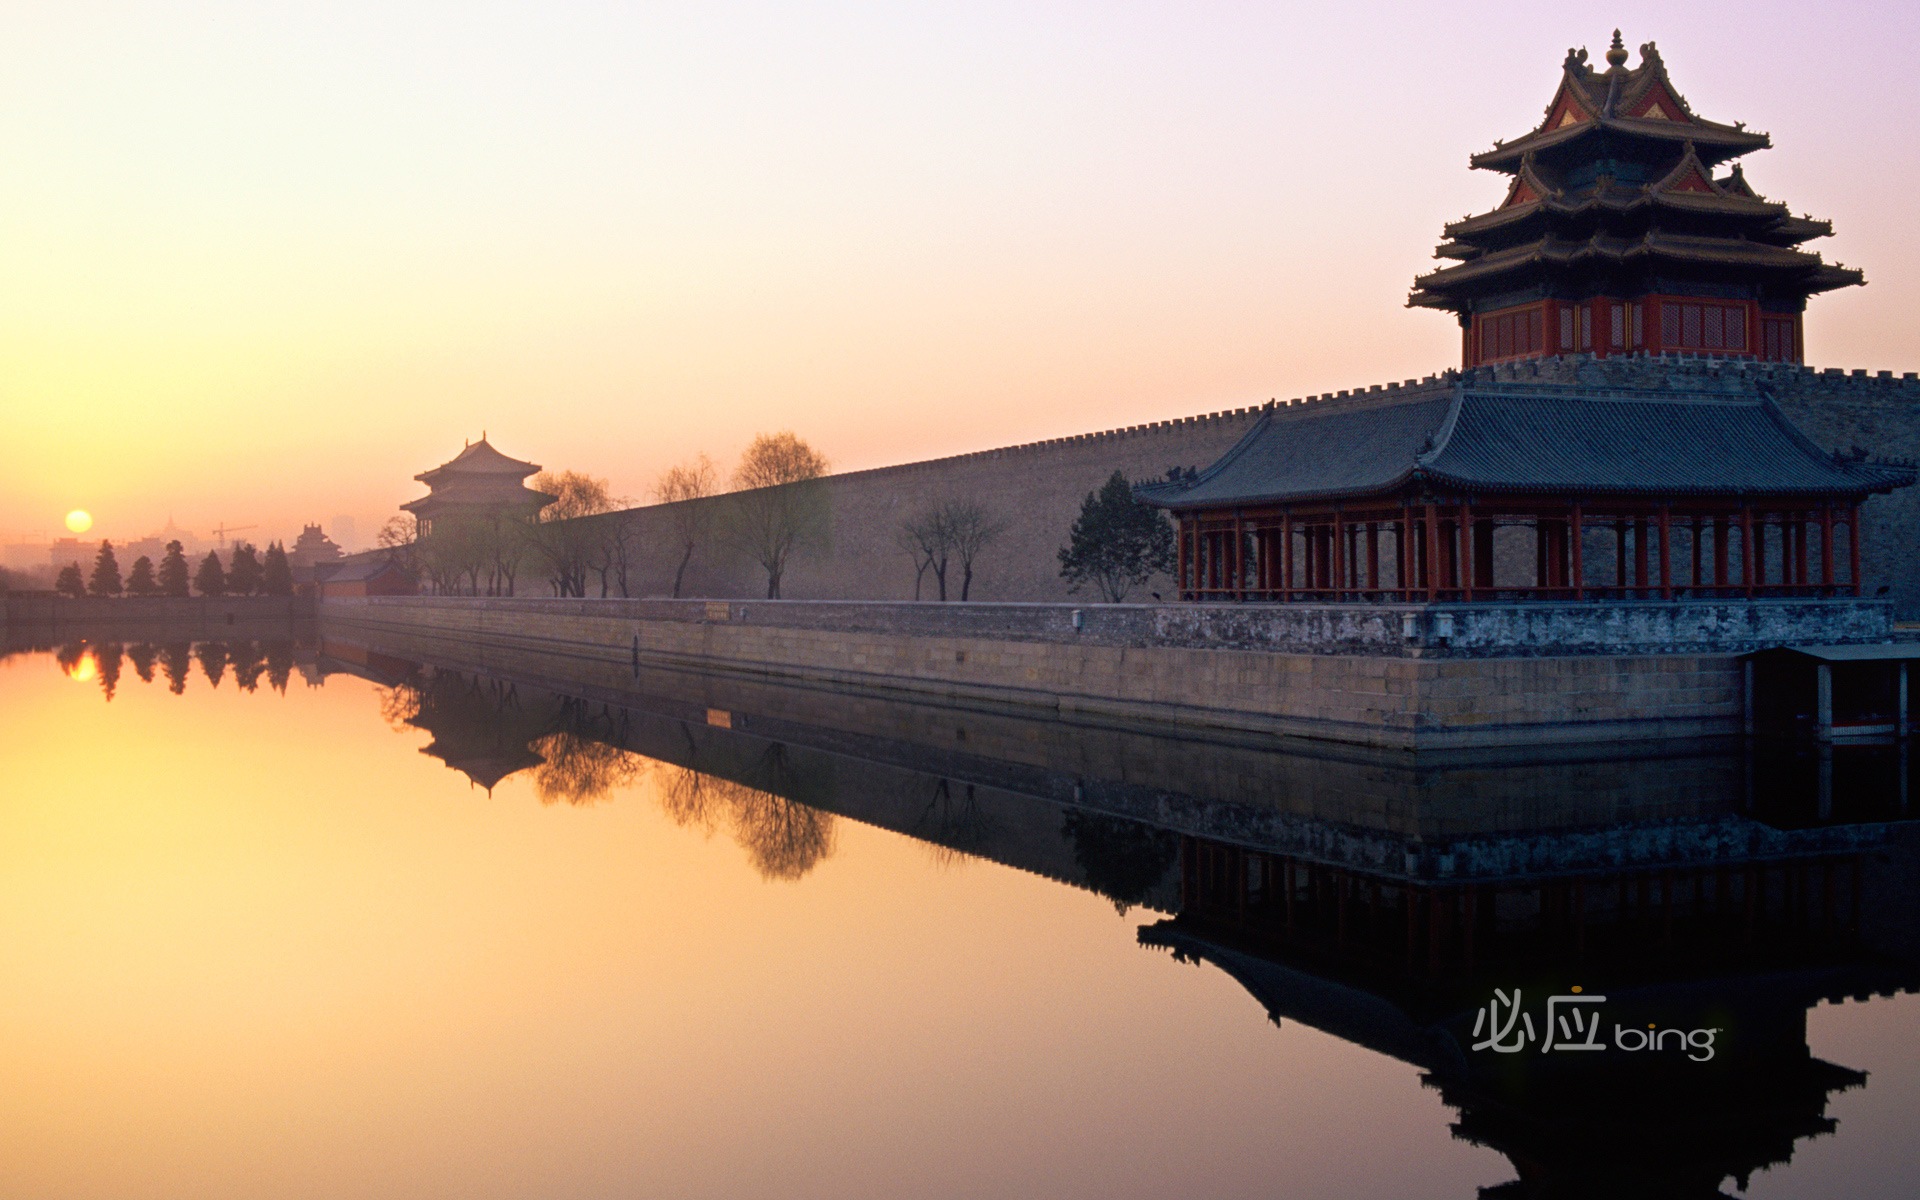 Bing selection best HD wallpapers: China theme wallpaper (2) #5 - 1920x1200